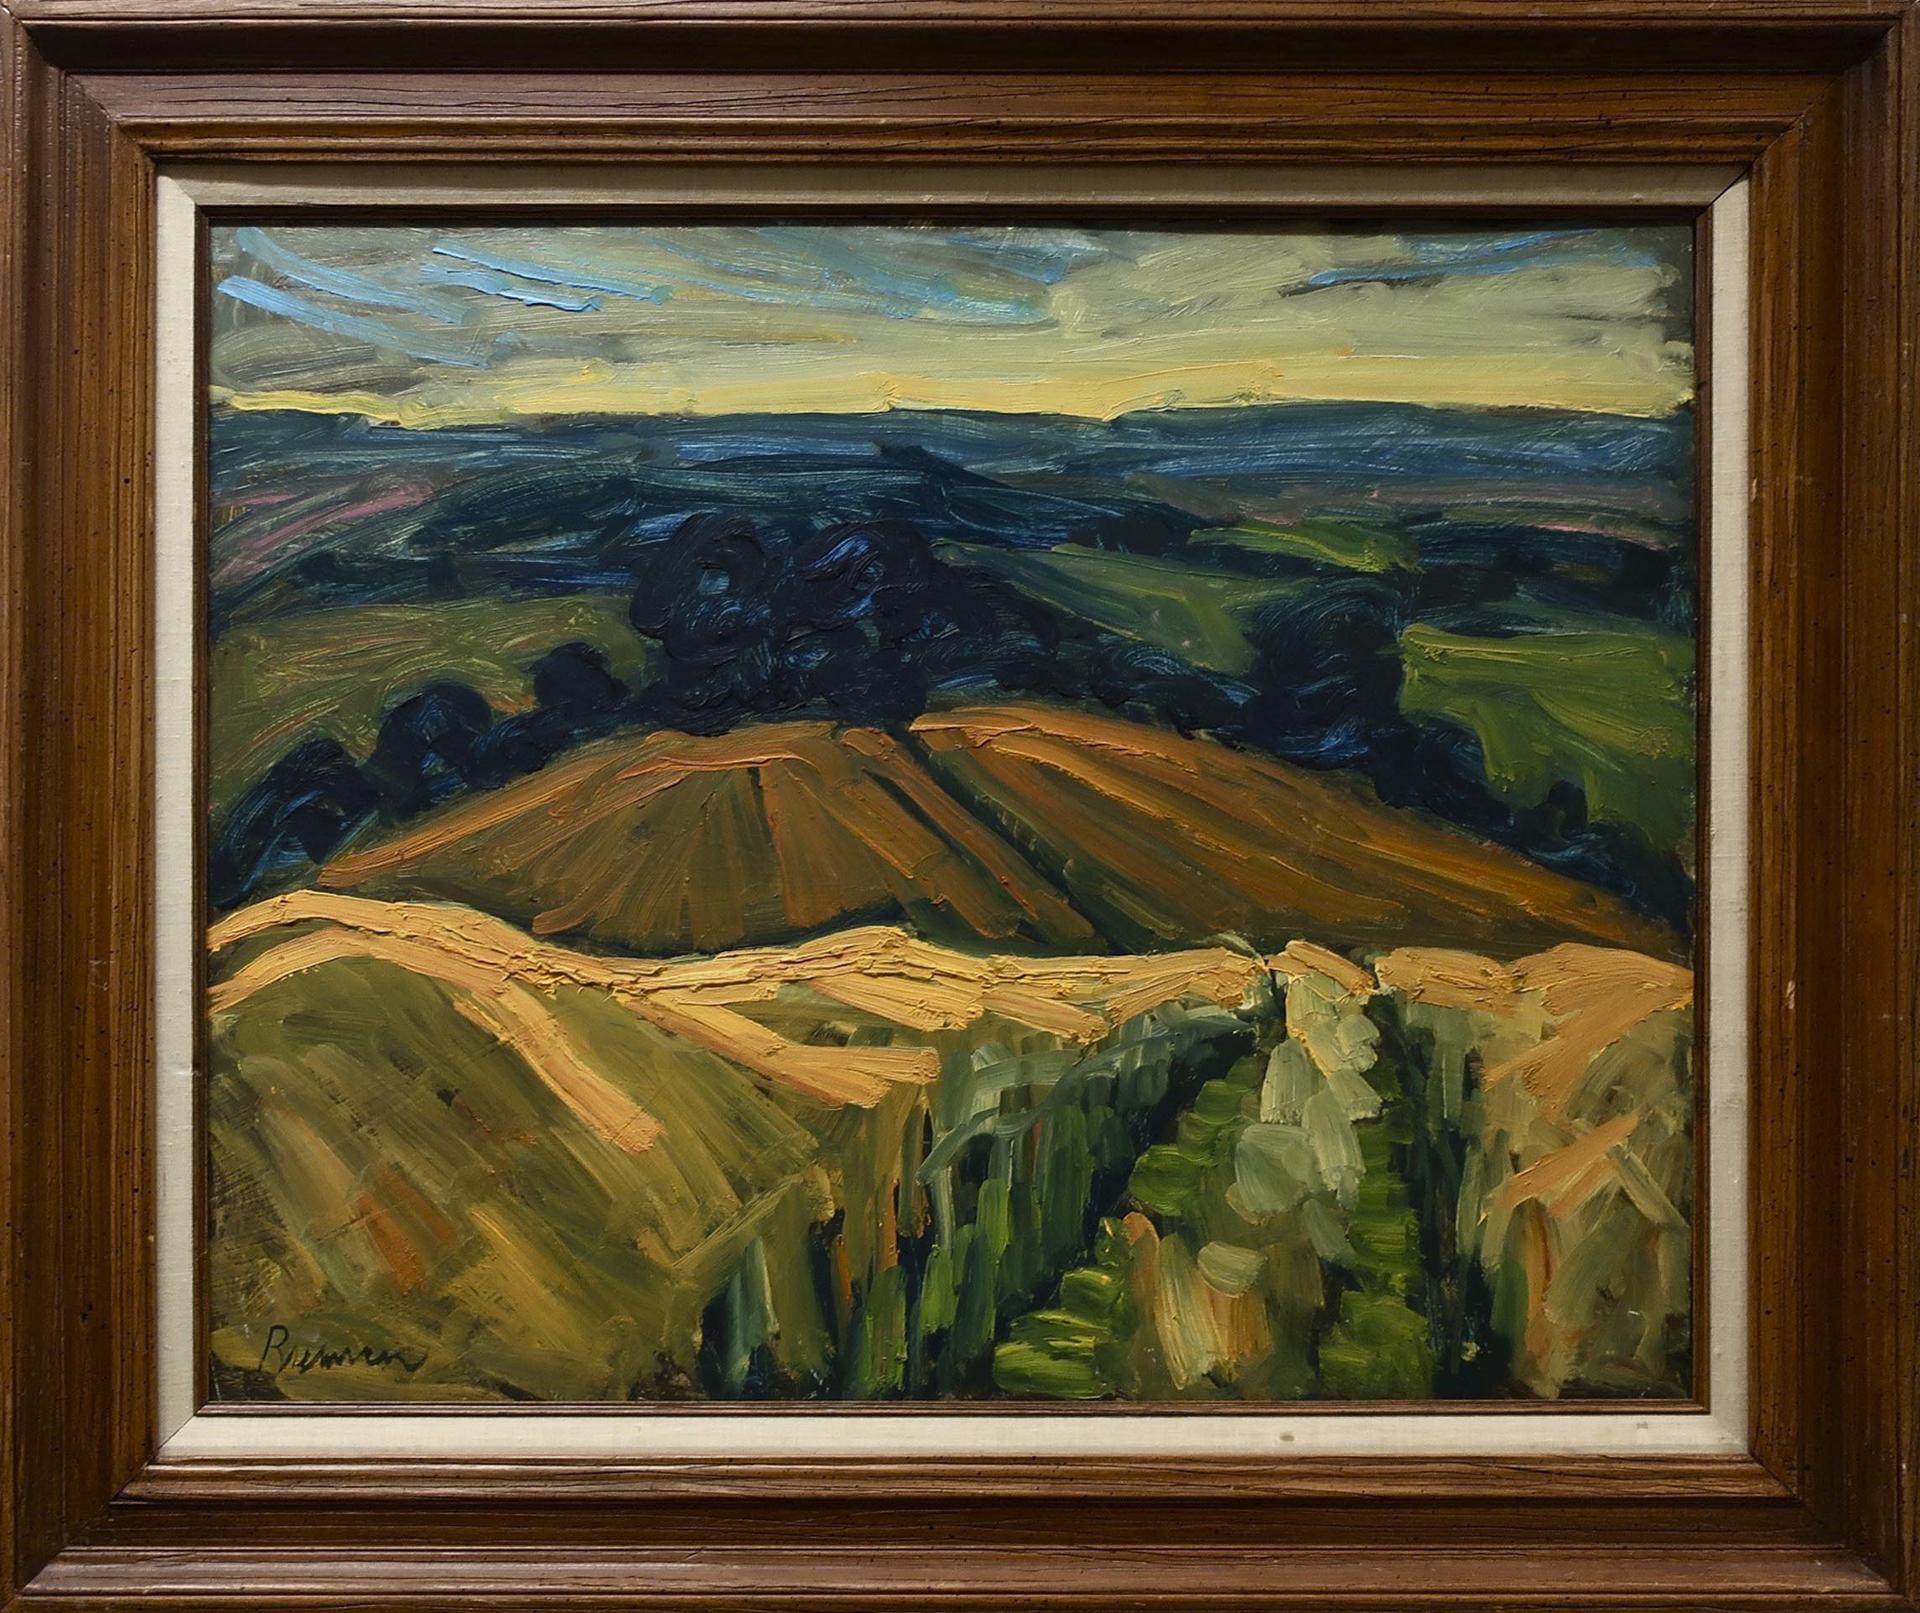 Jerry Brennan (1950) - Untitled (Rolling Hills Of Gold)